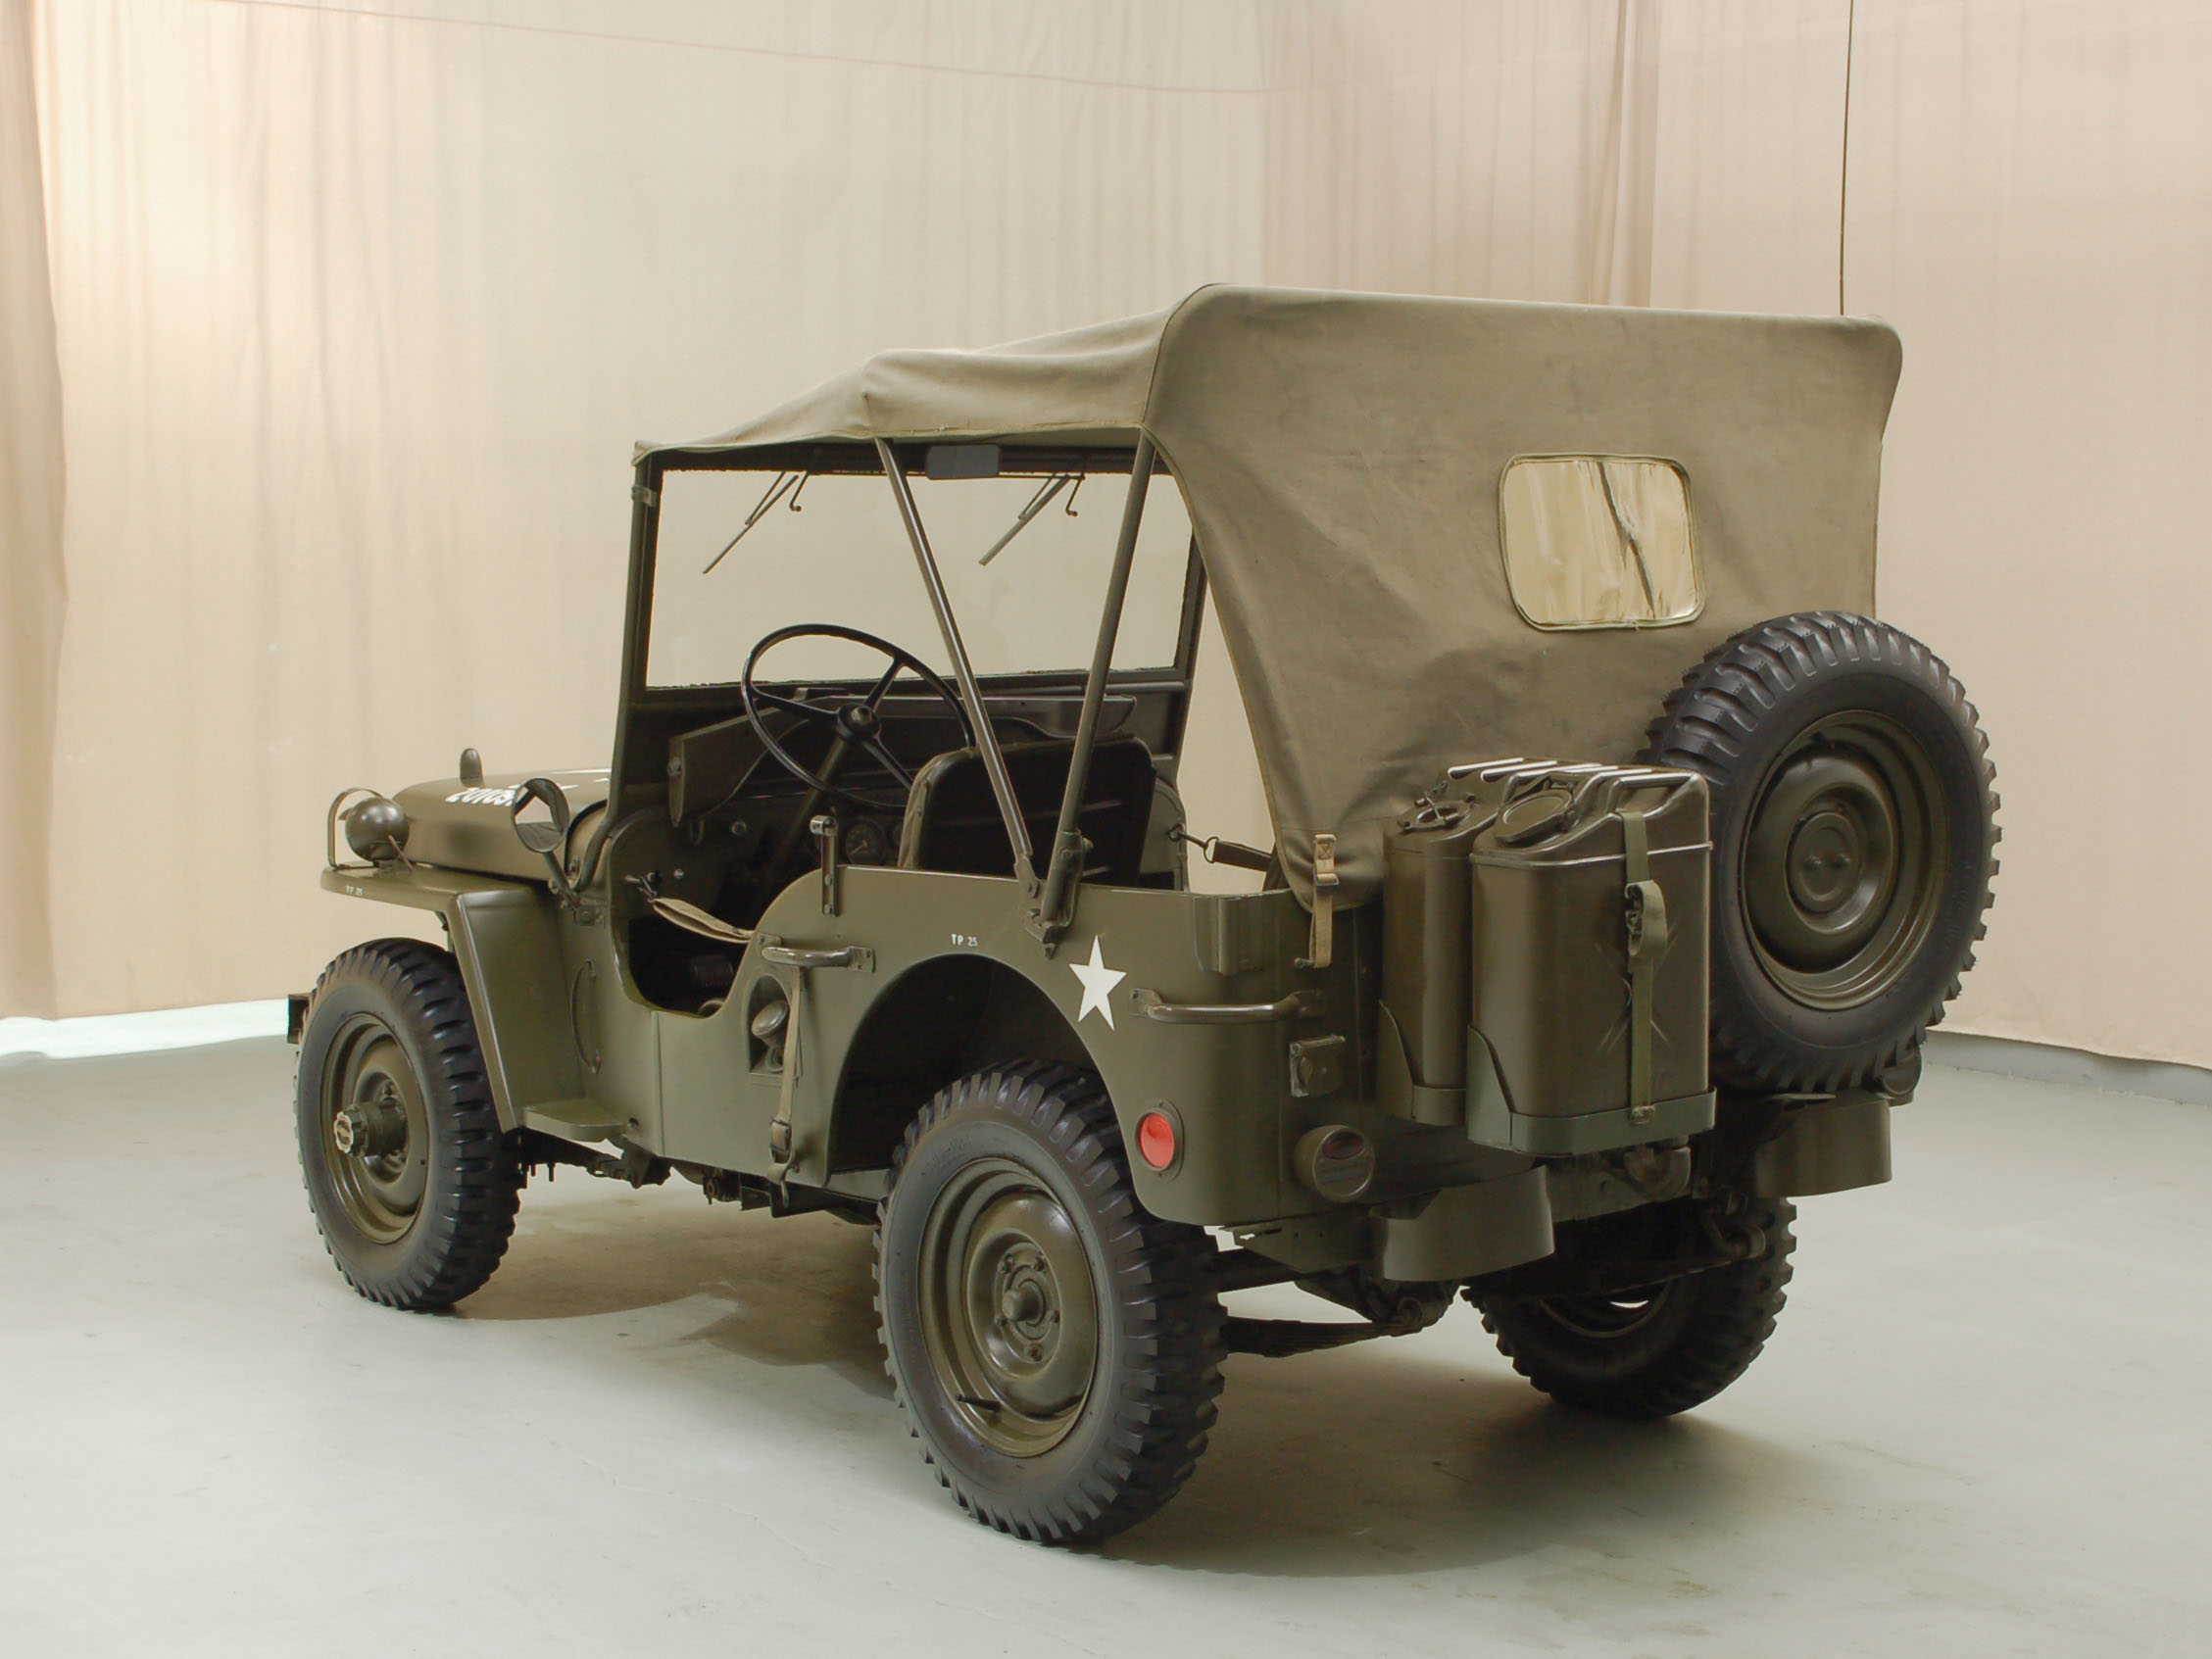 1945 willys-overland mb (jeep) 1/4 ton